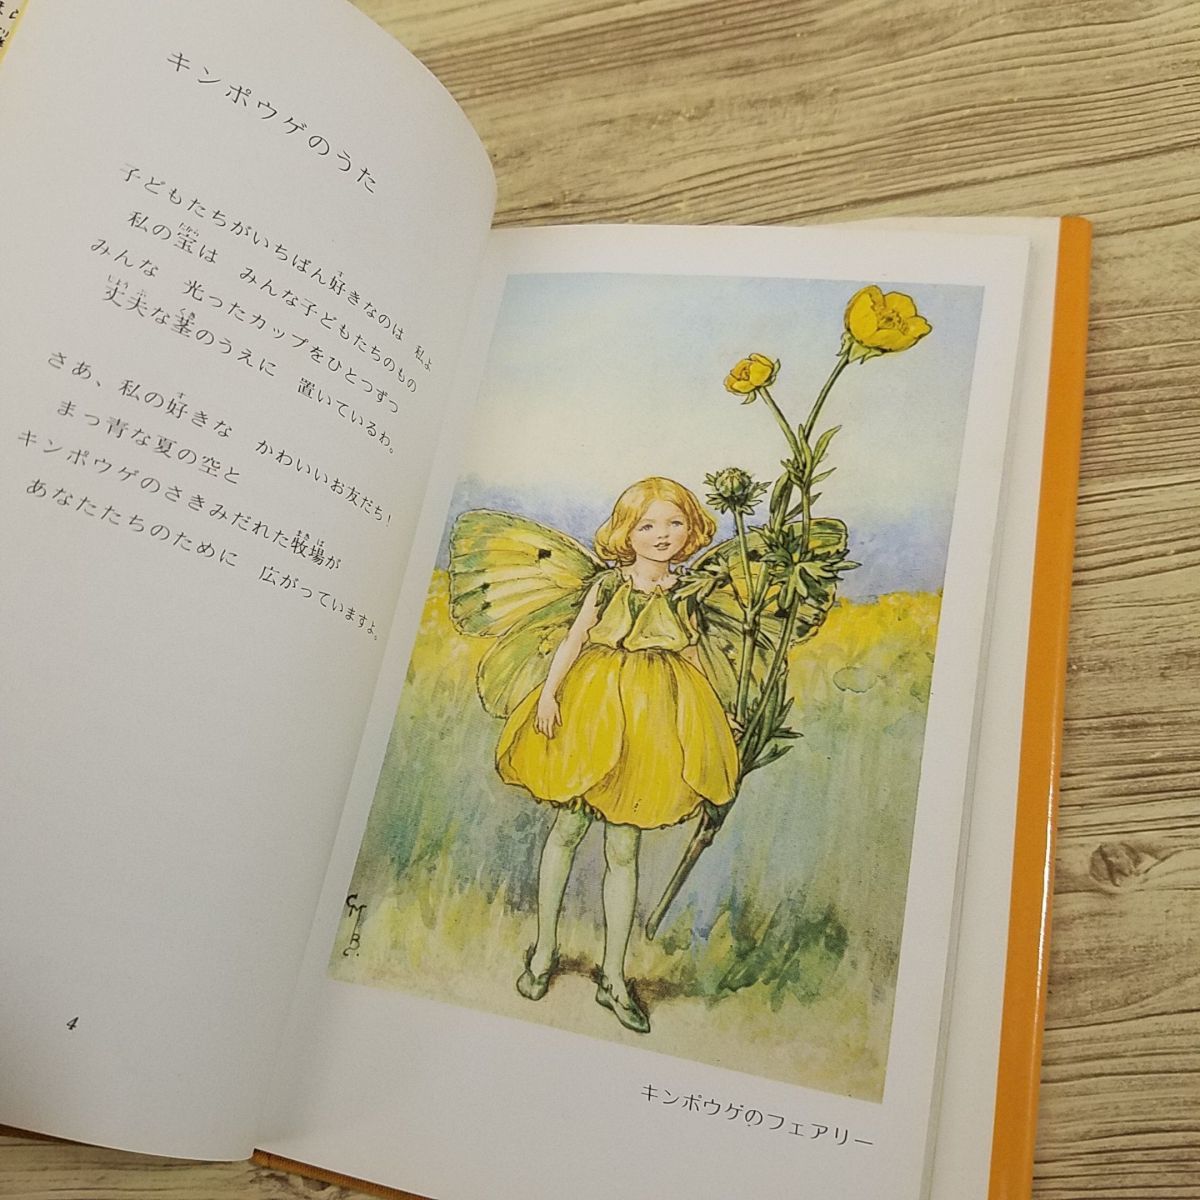  book of paintings in print [sisi Lee * Mary -* Barker FLOWER FAIRIES of the Summer... ..(1979 year the first version 1.)] Kaiseisha Fairy of Flower ..